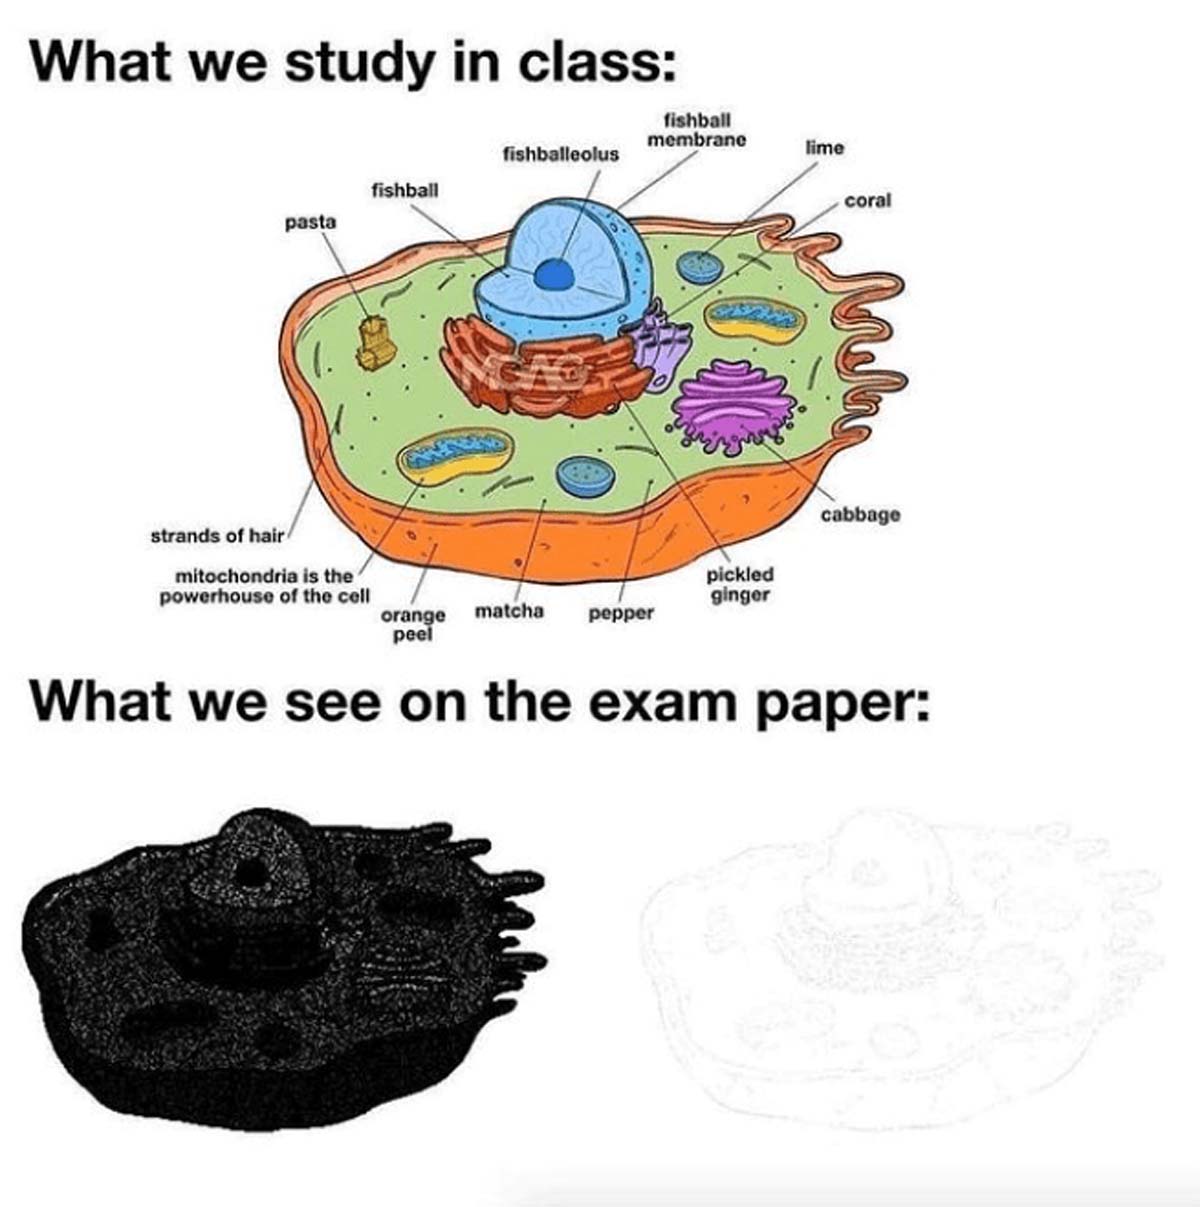 cell biology memes - What we study in class fishball membrane fishballeolus lime fishball coral pasta strands of hair mitochondria is the powerhouse of the cell pickled ginger matcha orange peel pepper cabbage What we see on the exam paper